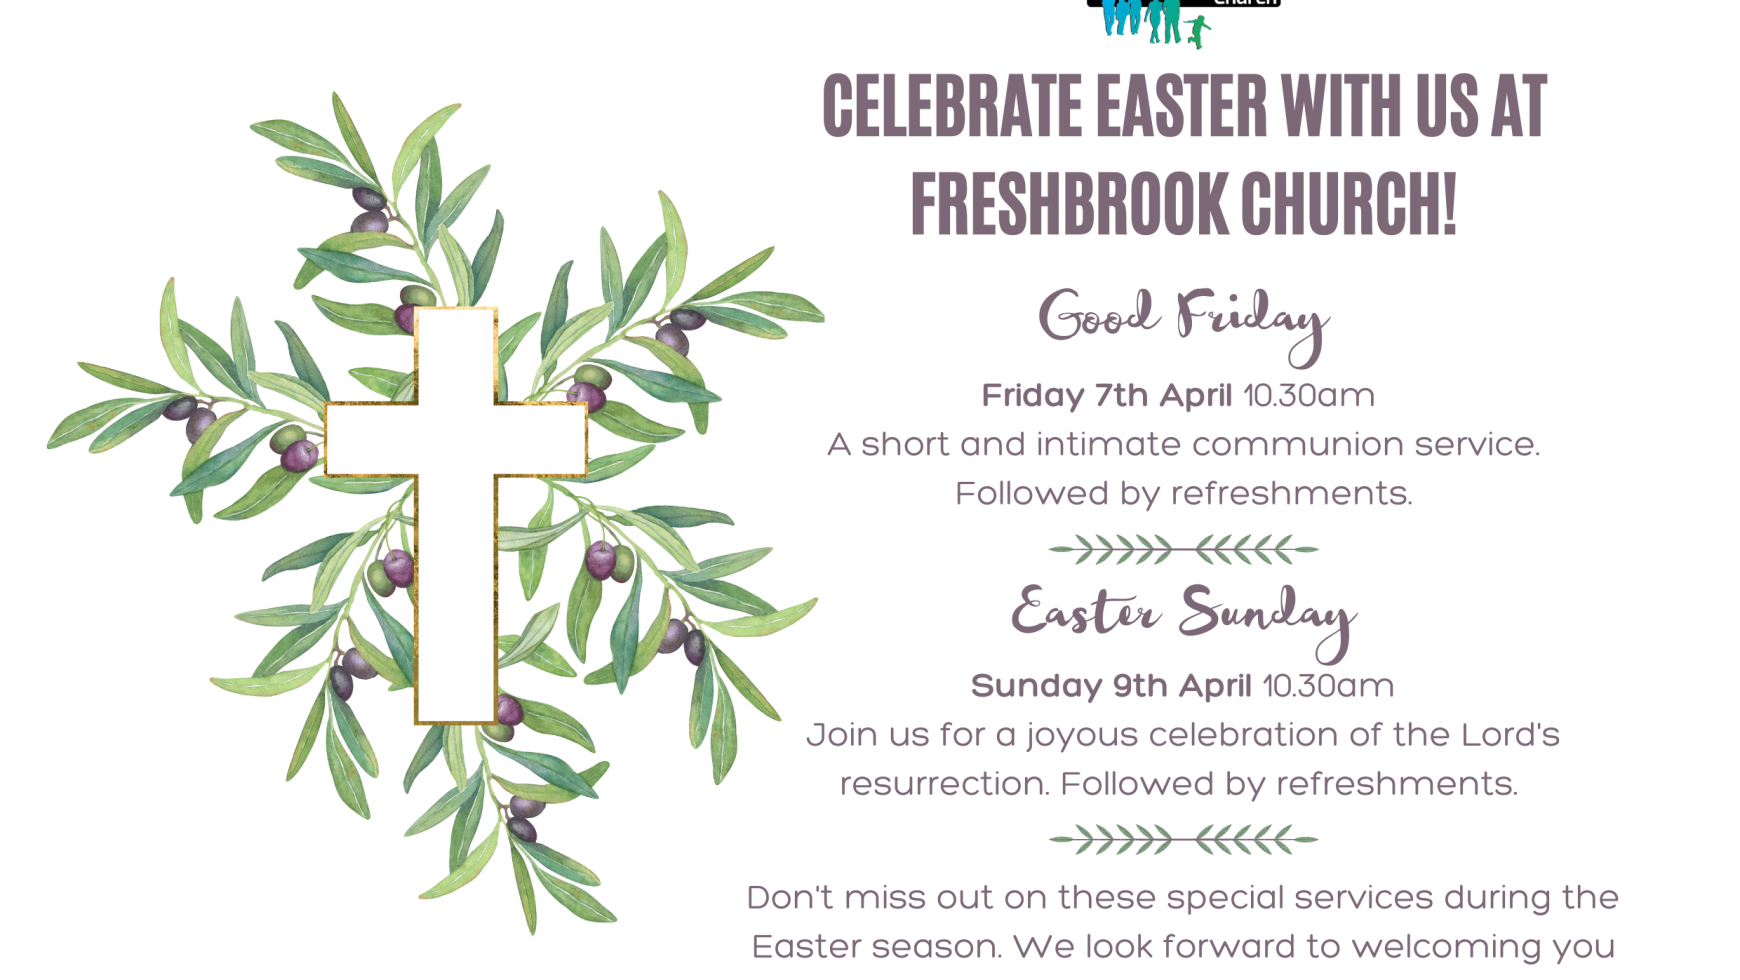 Easter Services at Freshbrook Church